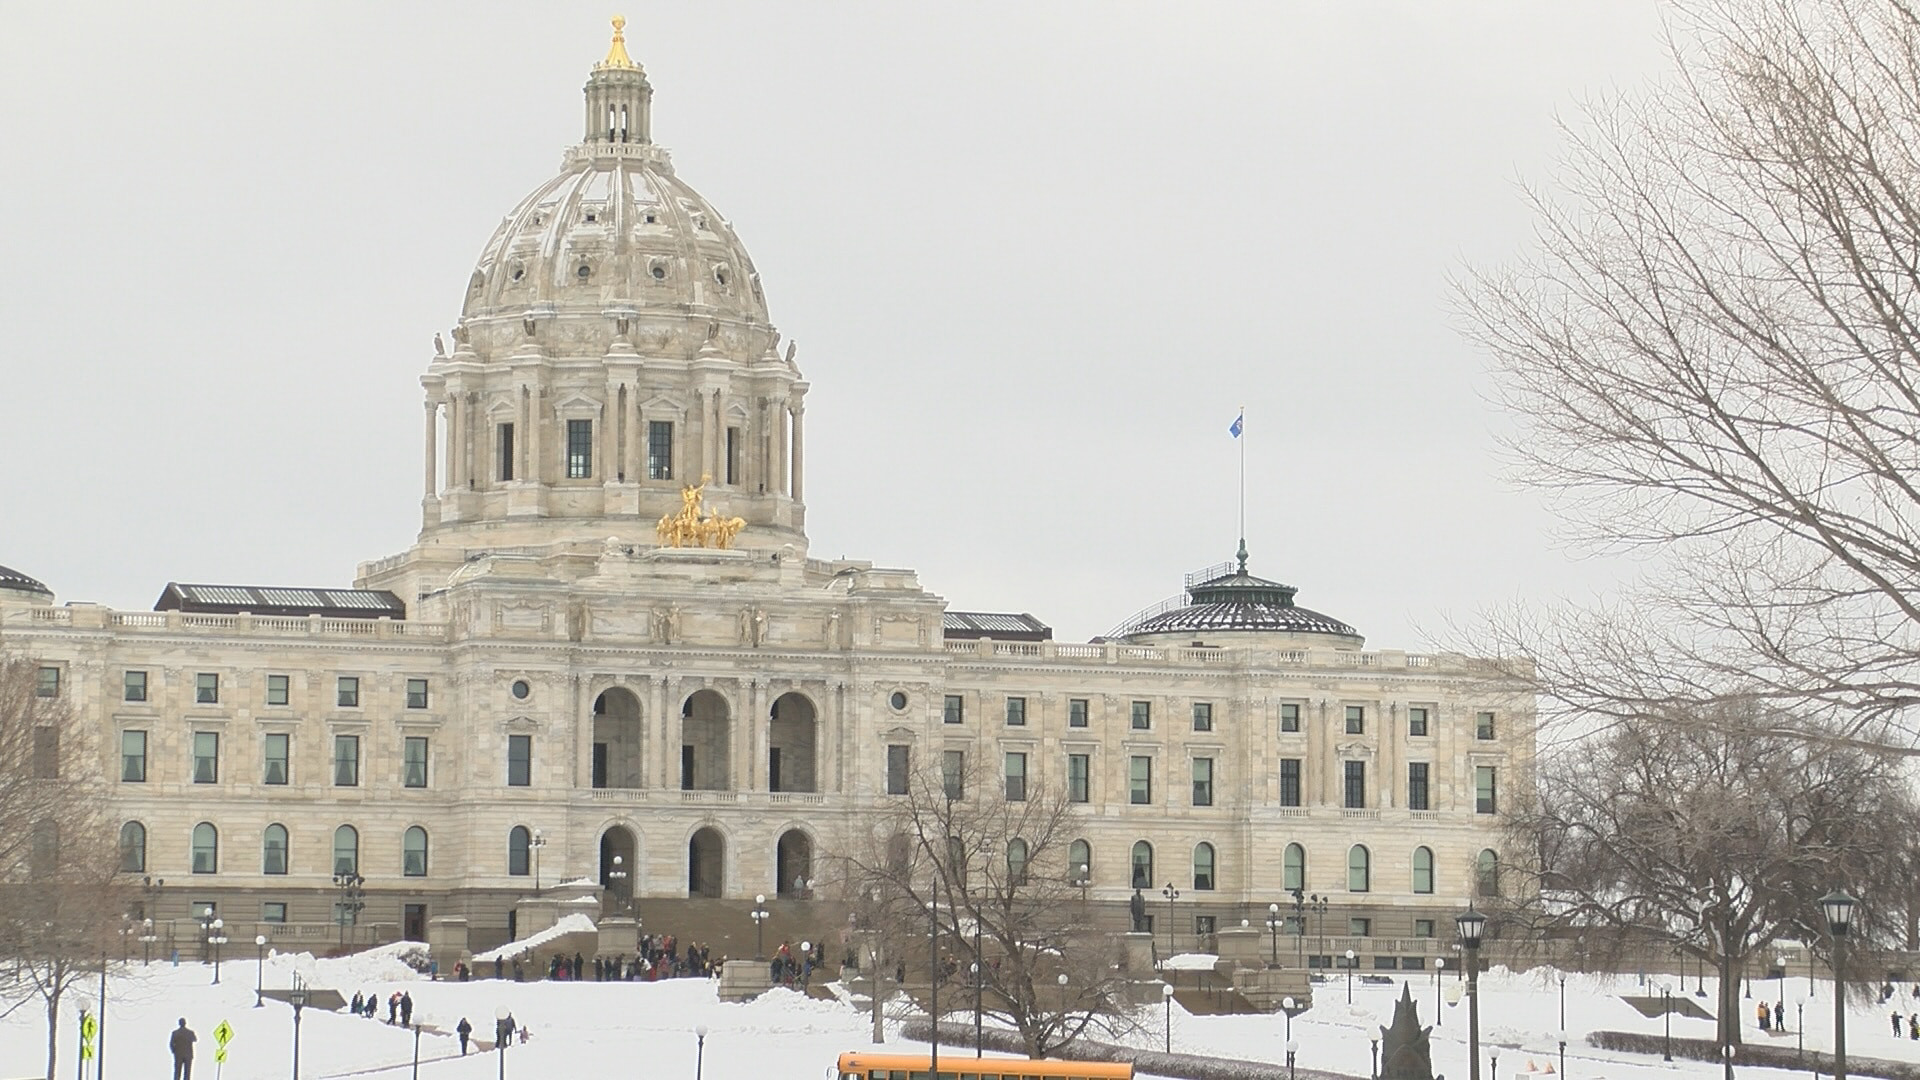 Minnesota’s new bonding bill passed the house with ease, the Senate